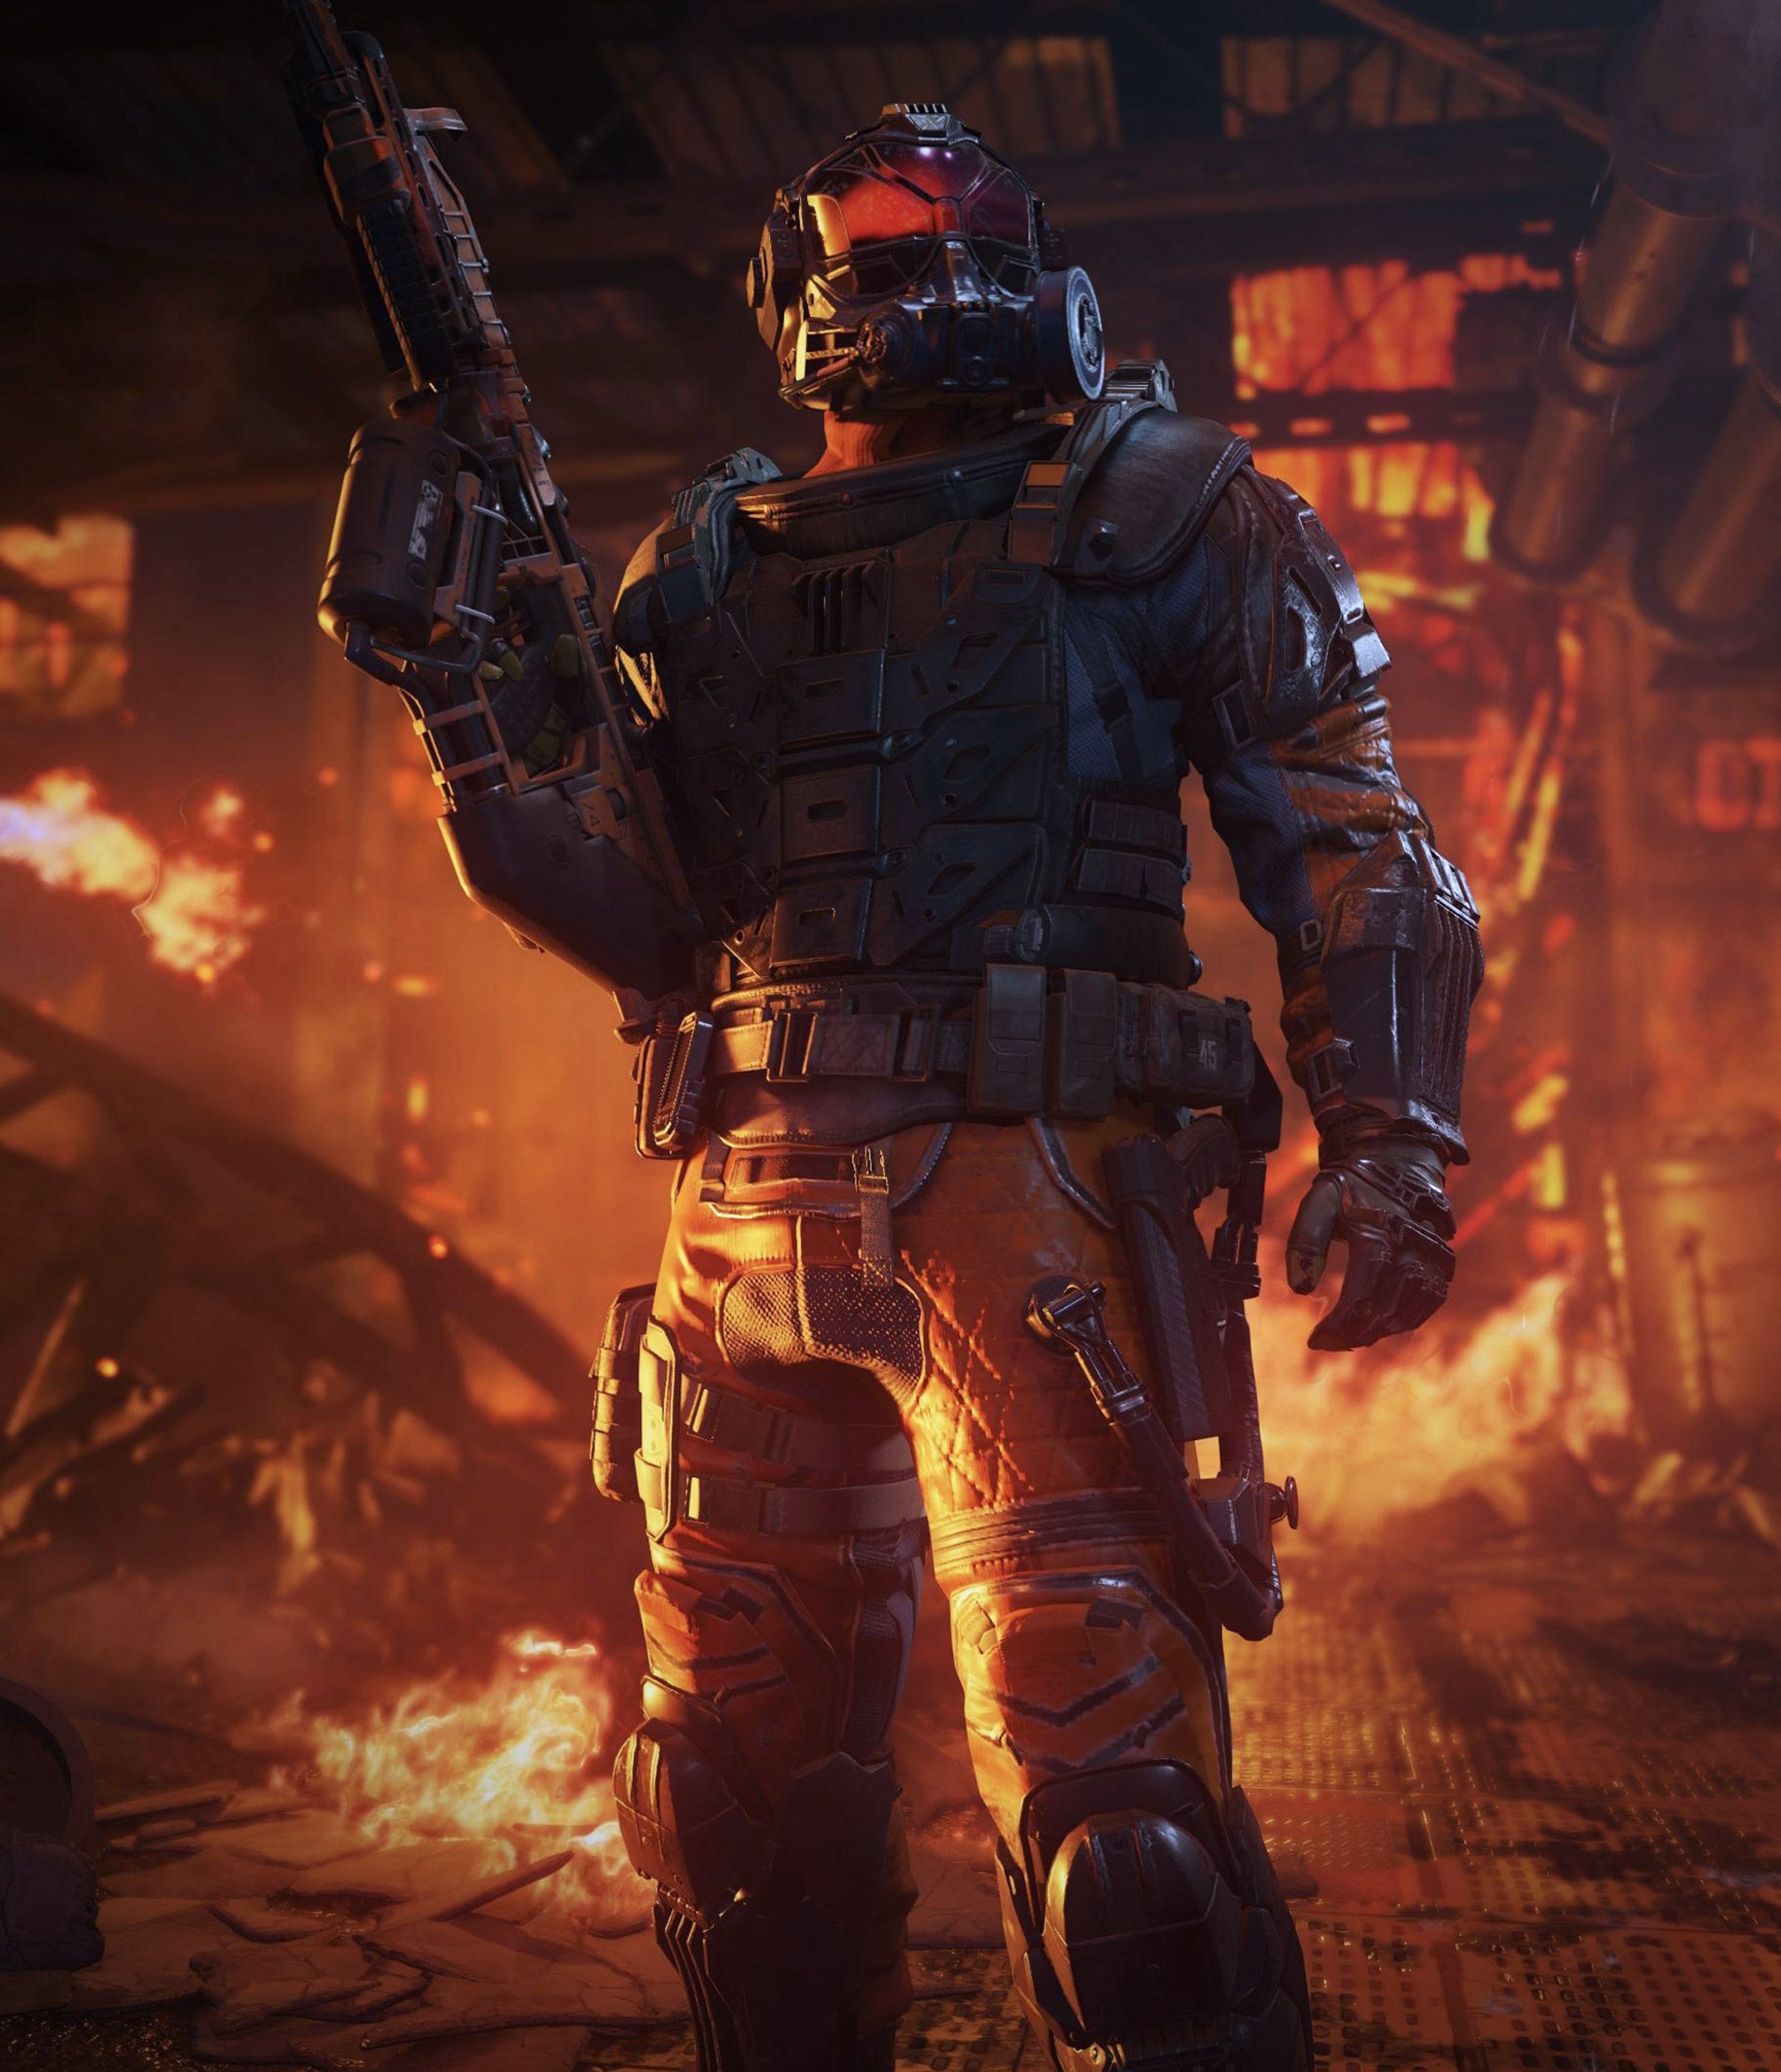 Epic Call of Duty: Black Ops 3 Wallpapers for Mobile Phones – Call ...